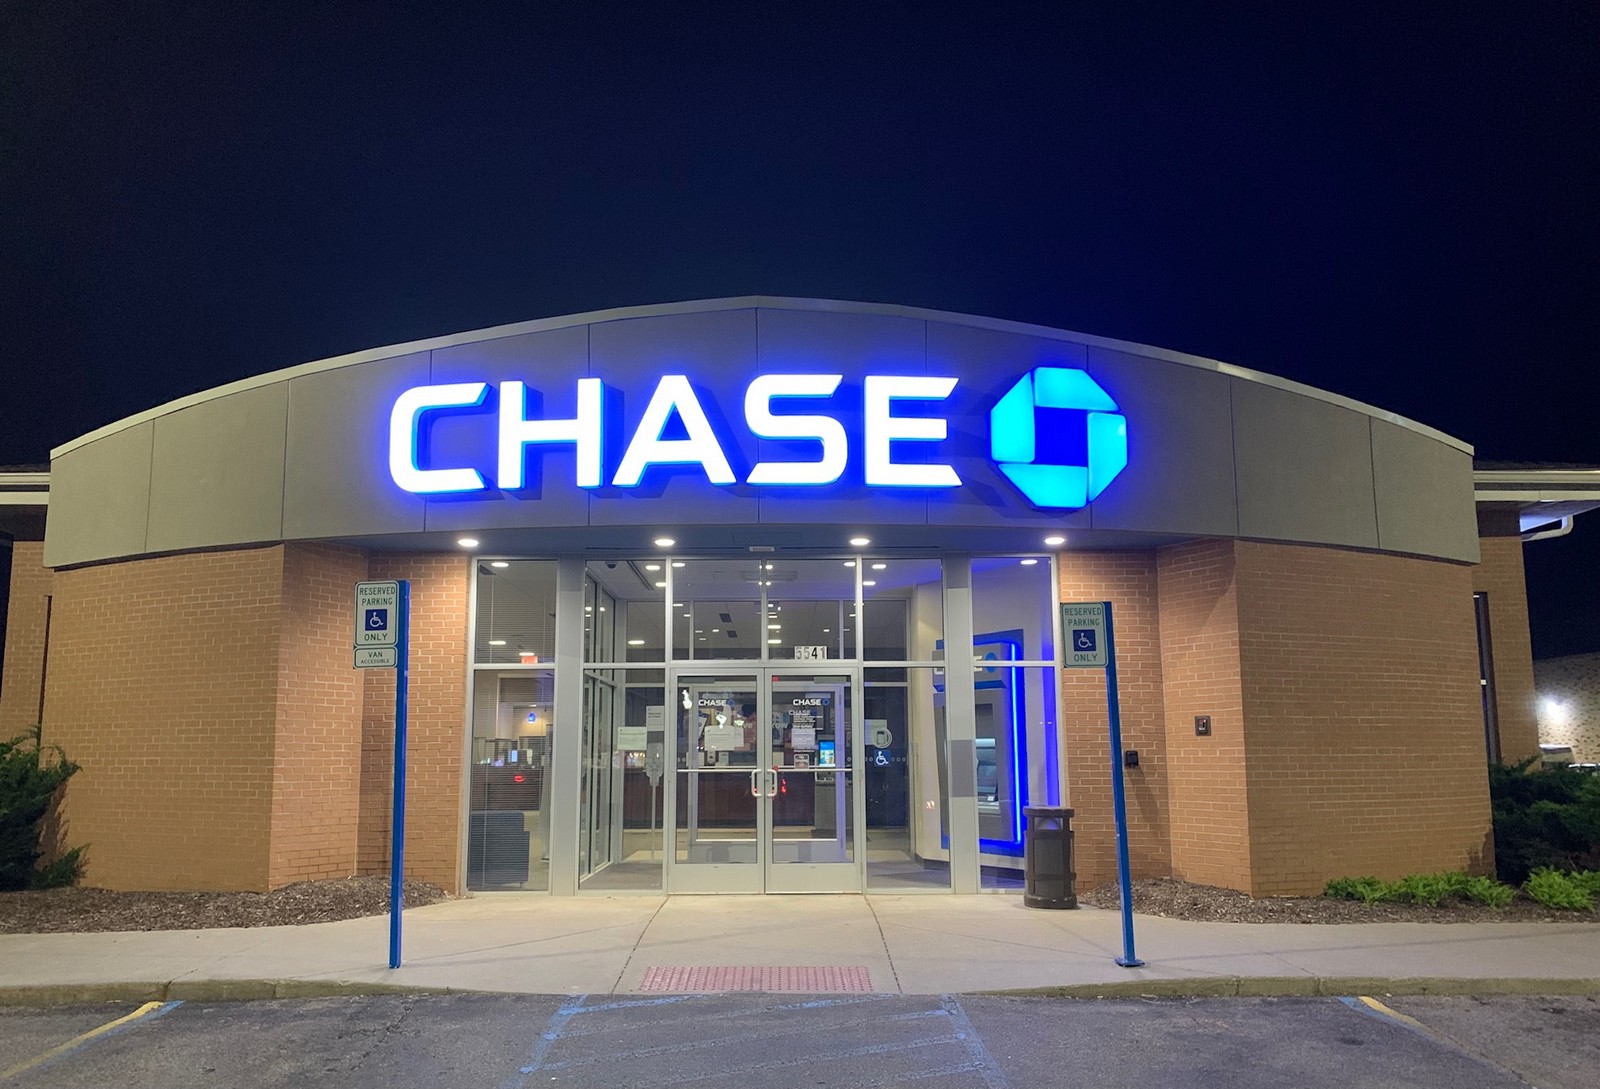 Chase Sapphire Upgrade